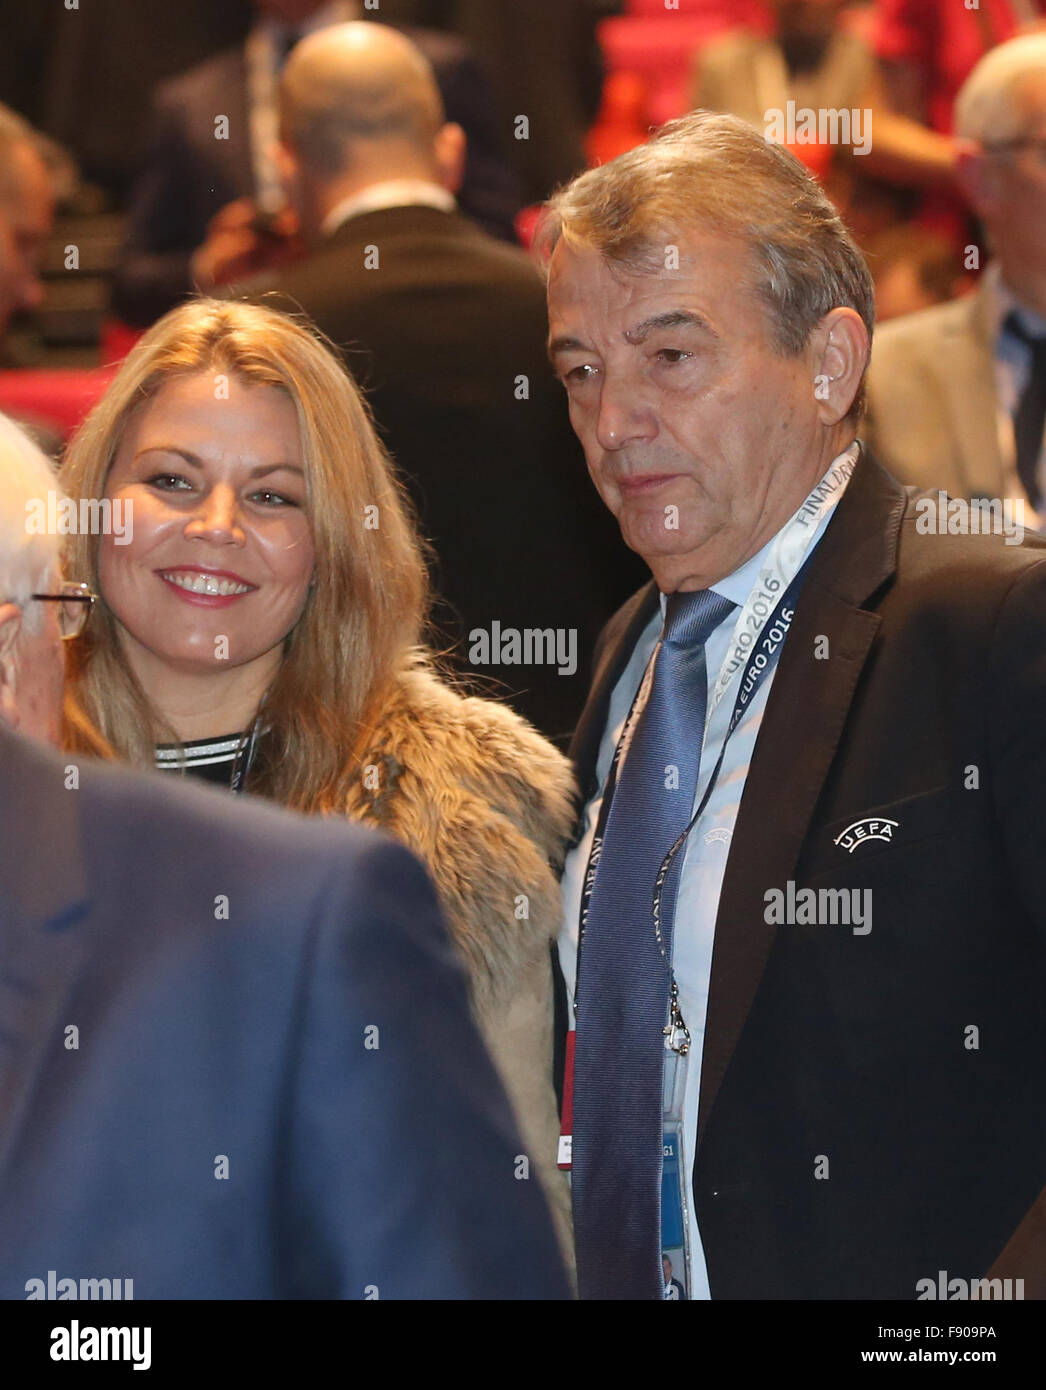 Paris, France. 12th Dec, 2015. Wolfgang Niersbach, former president of Germany's soccer association (DFB), and his partner Marion Popp arrive to the UEFA EURO 2016 final draw ceremony at the Palais des Congrès in Paris, France, 12 December 2015. The UEFA EURO 2016 soccer championship will take place from 10 June to 10 July 2016 in France. Photo: Christian Charisius/dpa/Alamy Live News Stock Photo